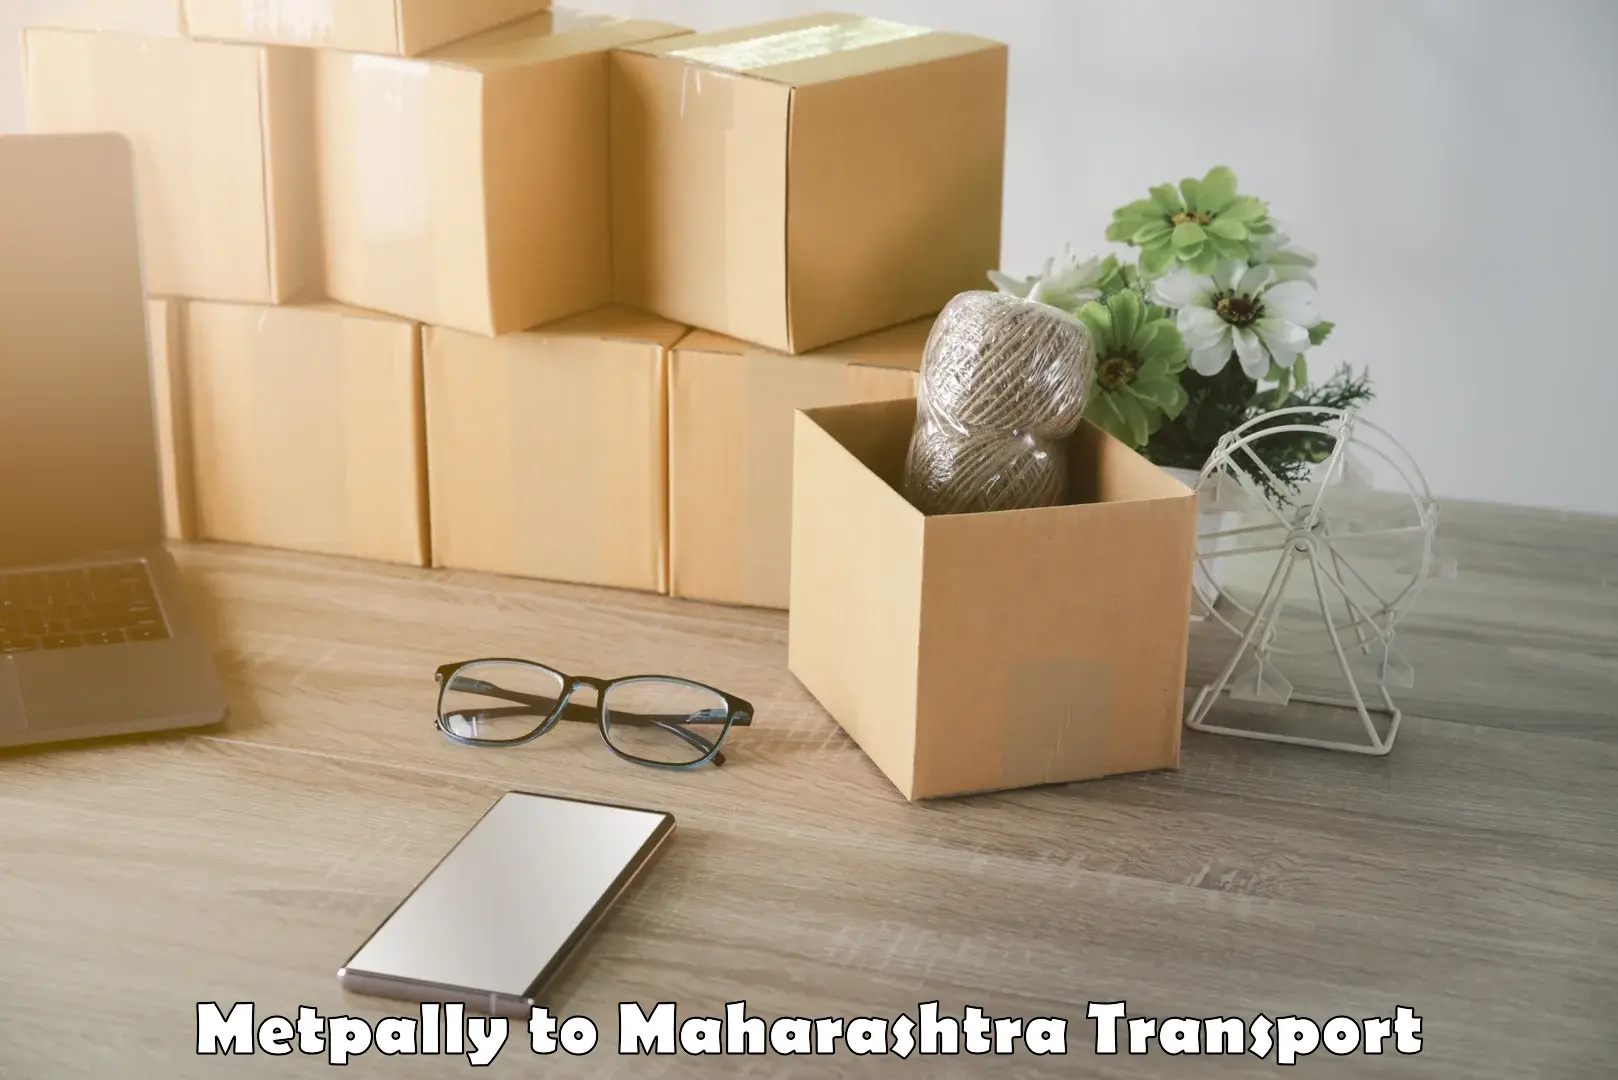 Road transport online services Metpally to Baramati